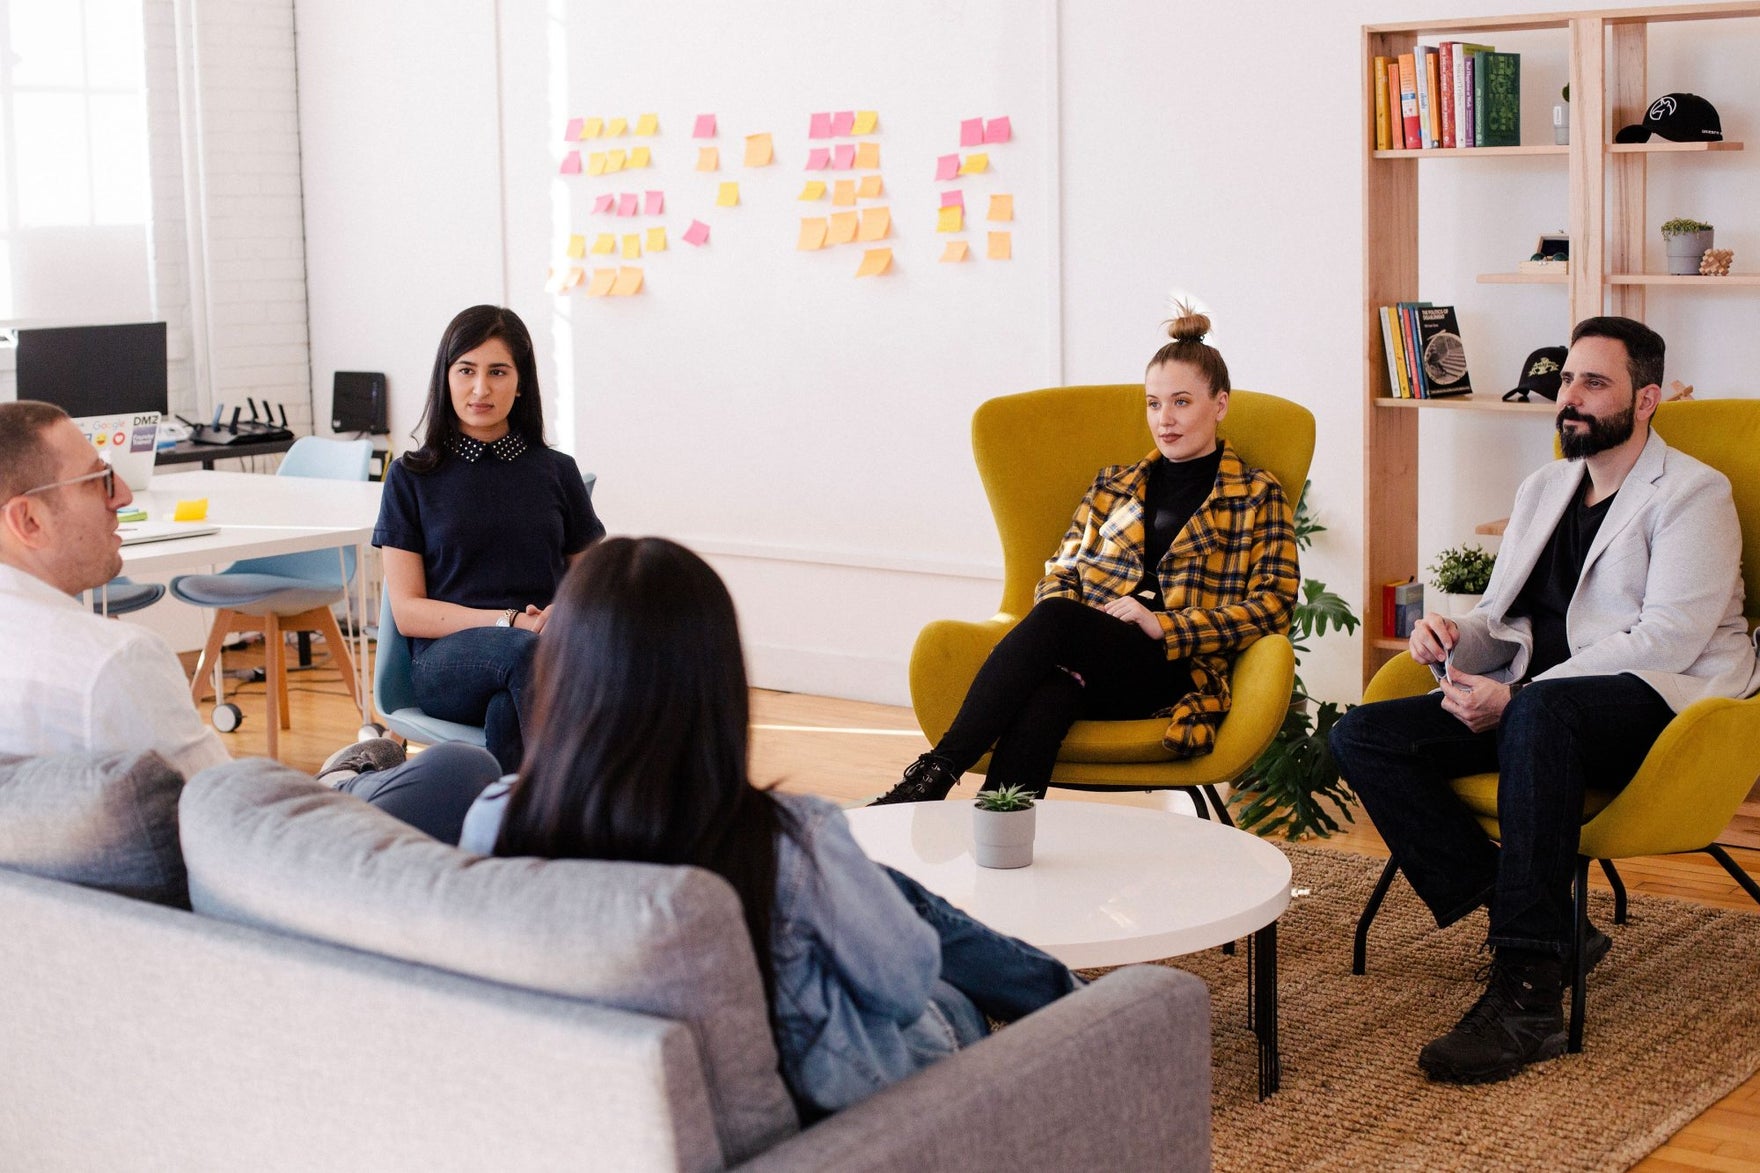 10 Ways to Make Meetings More Effective for Your Whole Team